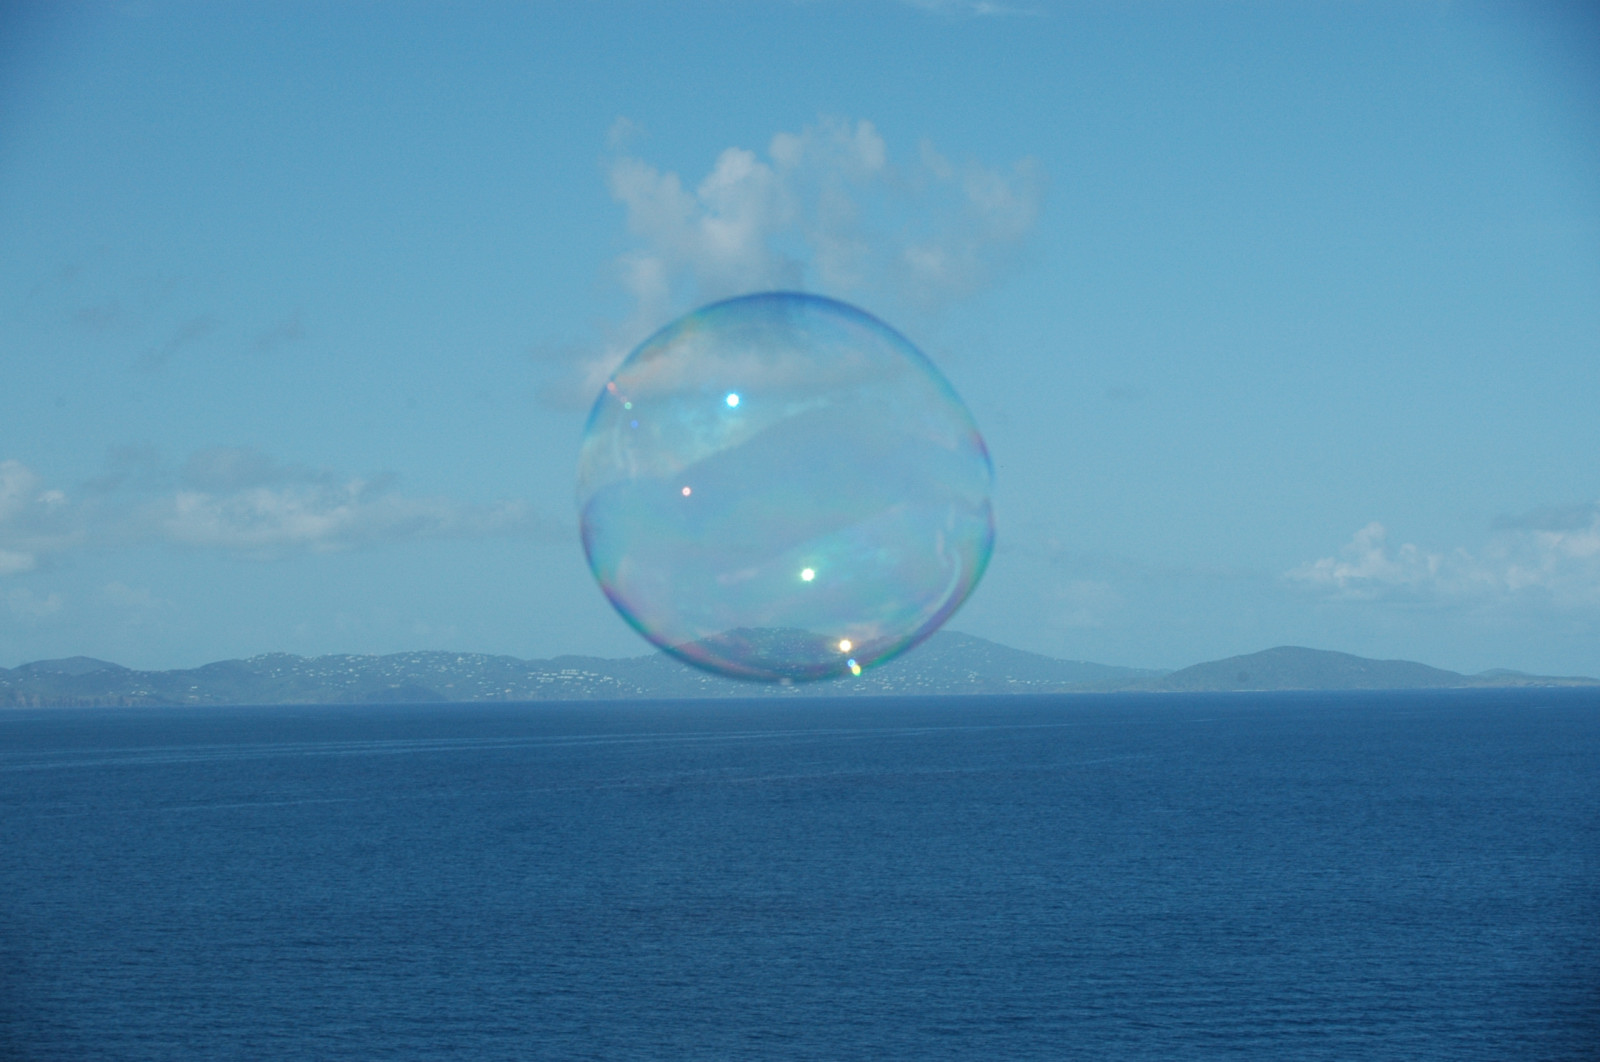 I see a bubble on the horizon!